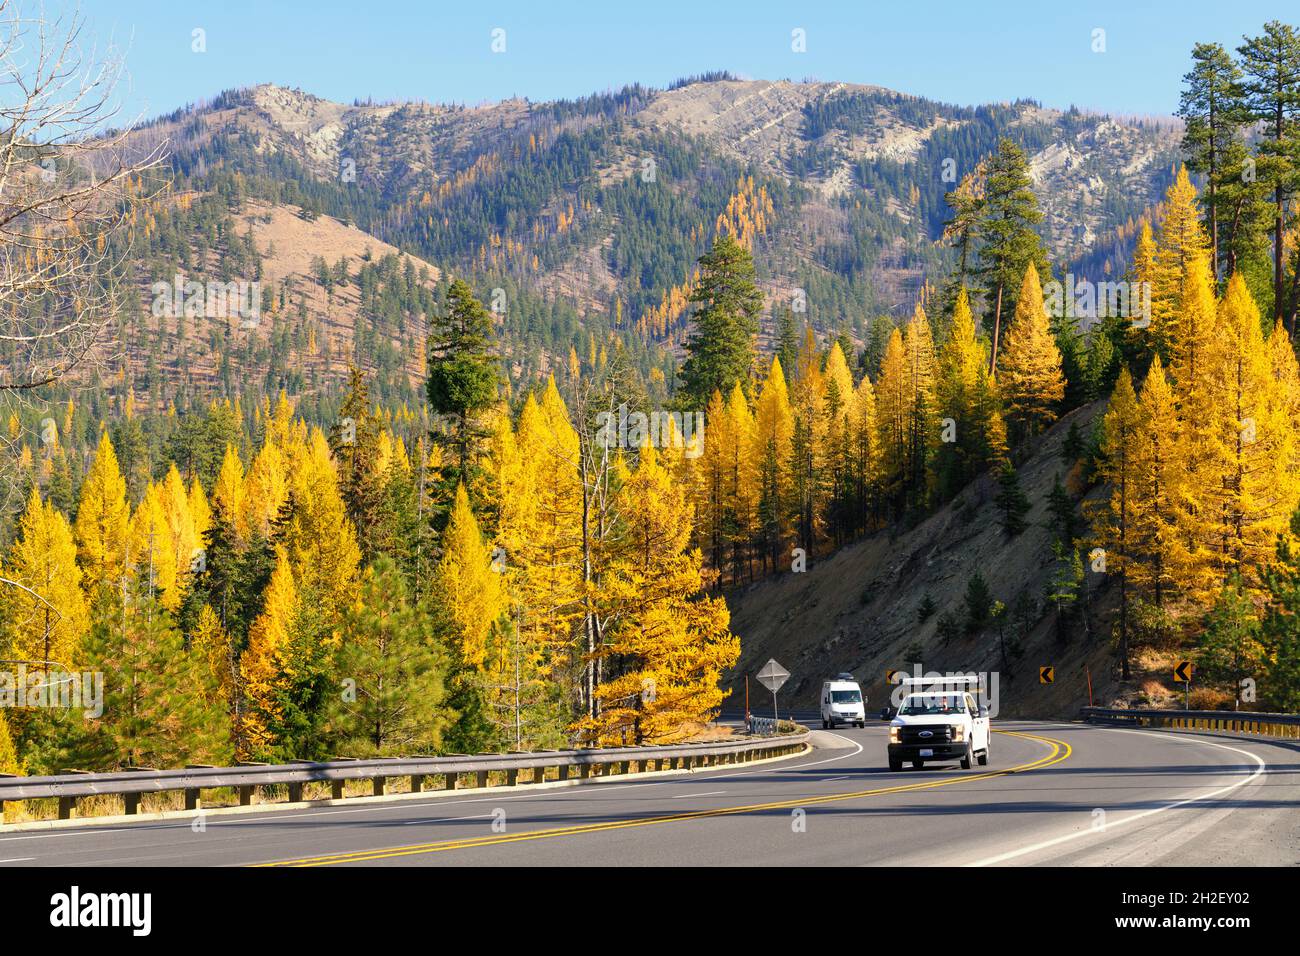 Blewett Pass, WA, USA - October 19, 2021; Southbound traffic approaches the summit of Blewett Pass with trees of fall yellow on hillsides Stock Photo